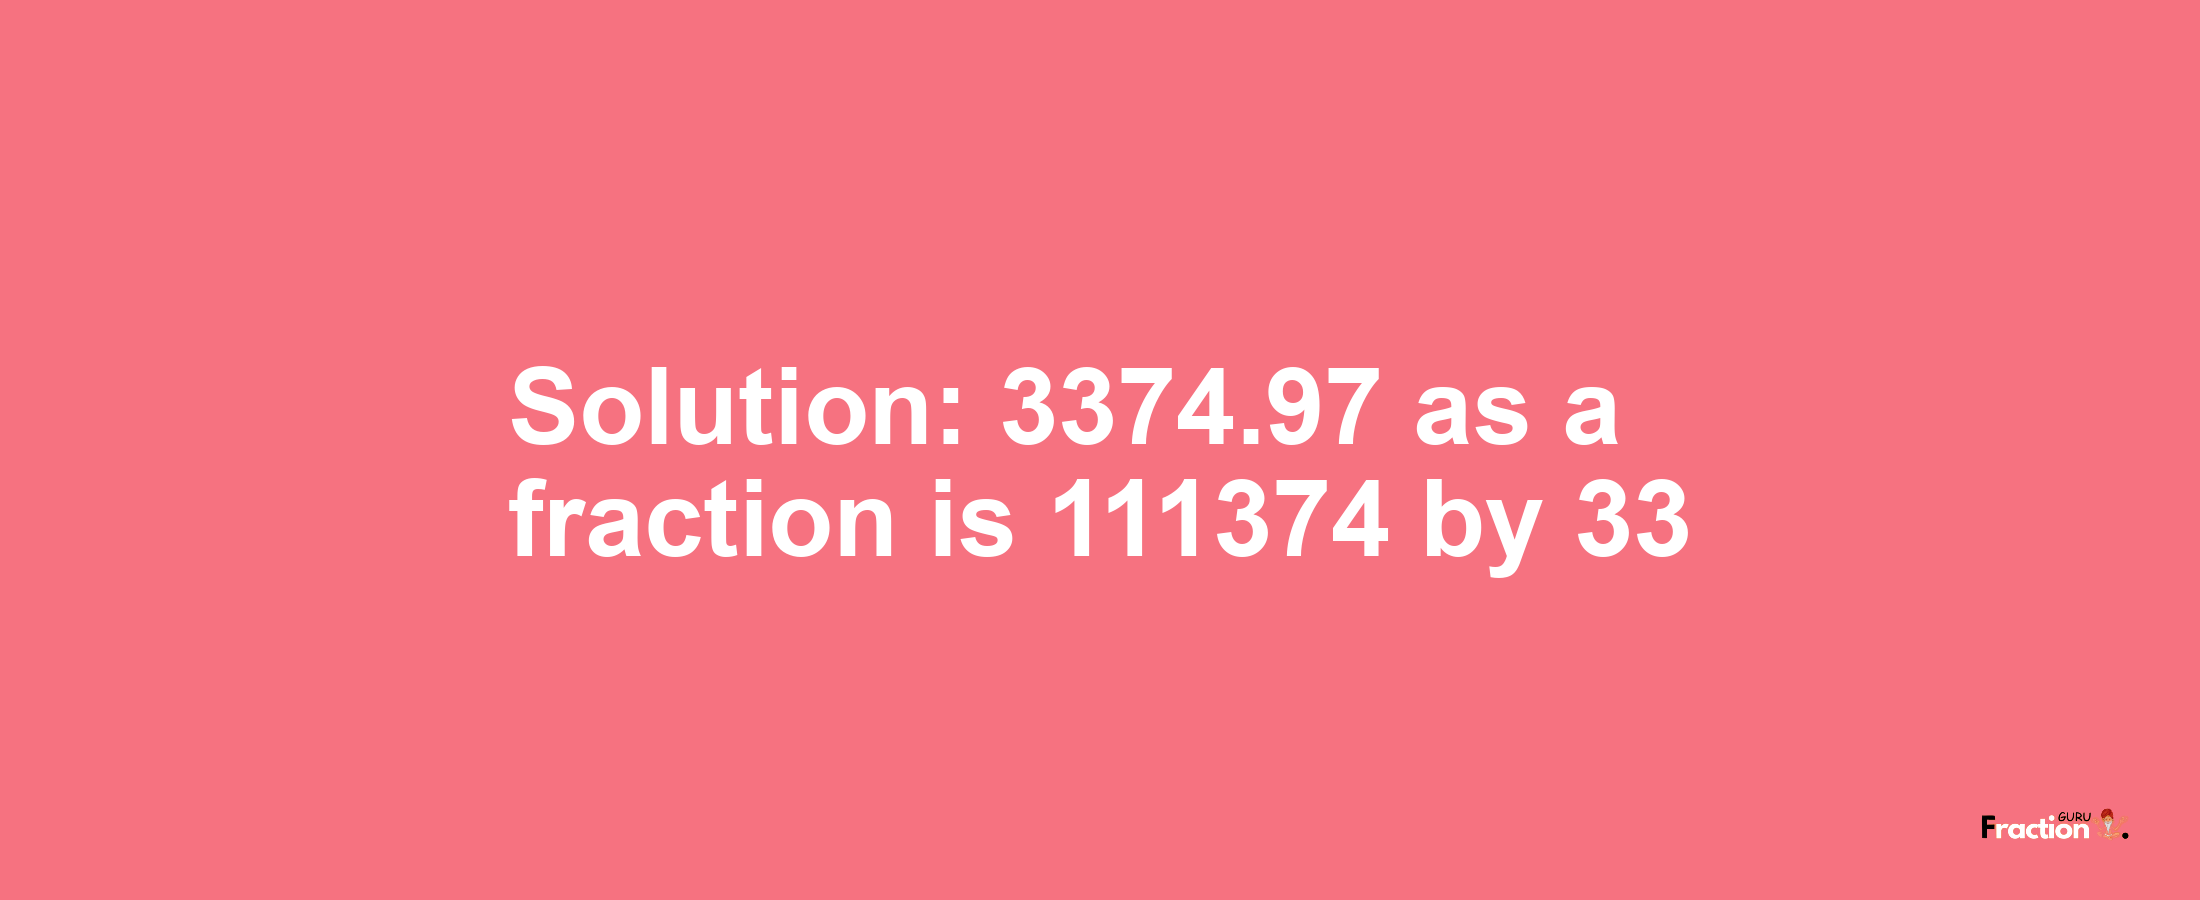 Solution:3374.97 as a fraction is 111374/33